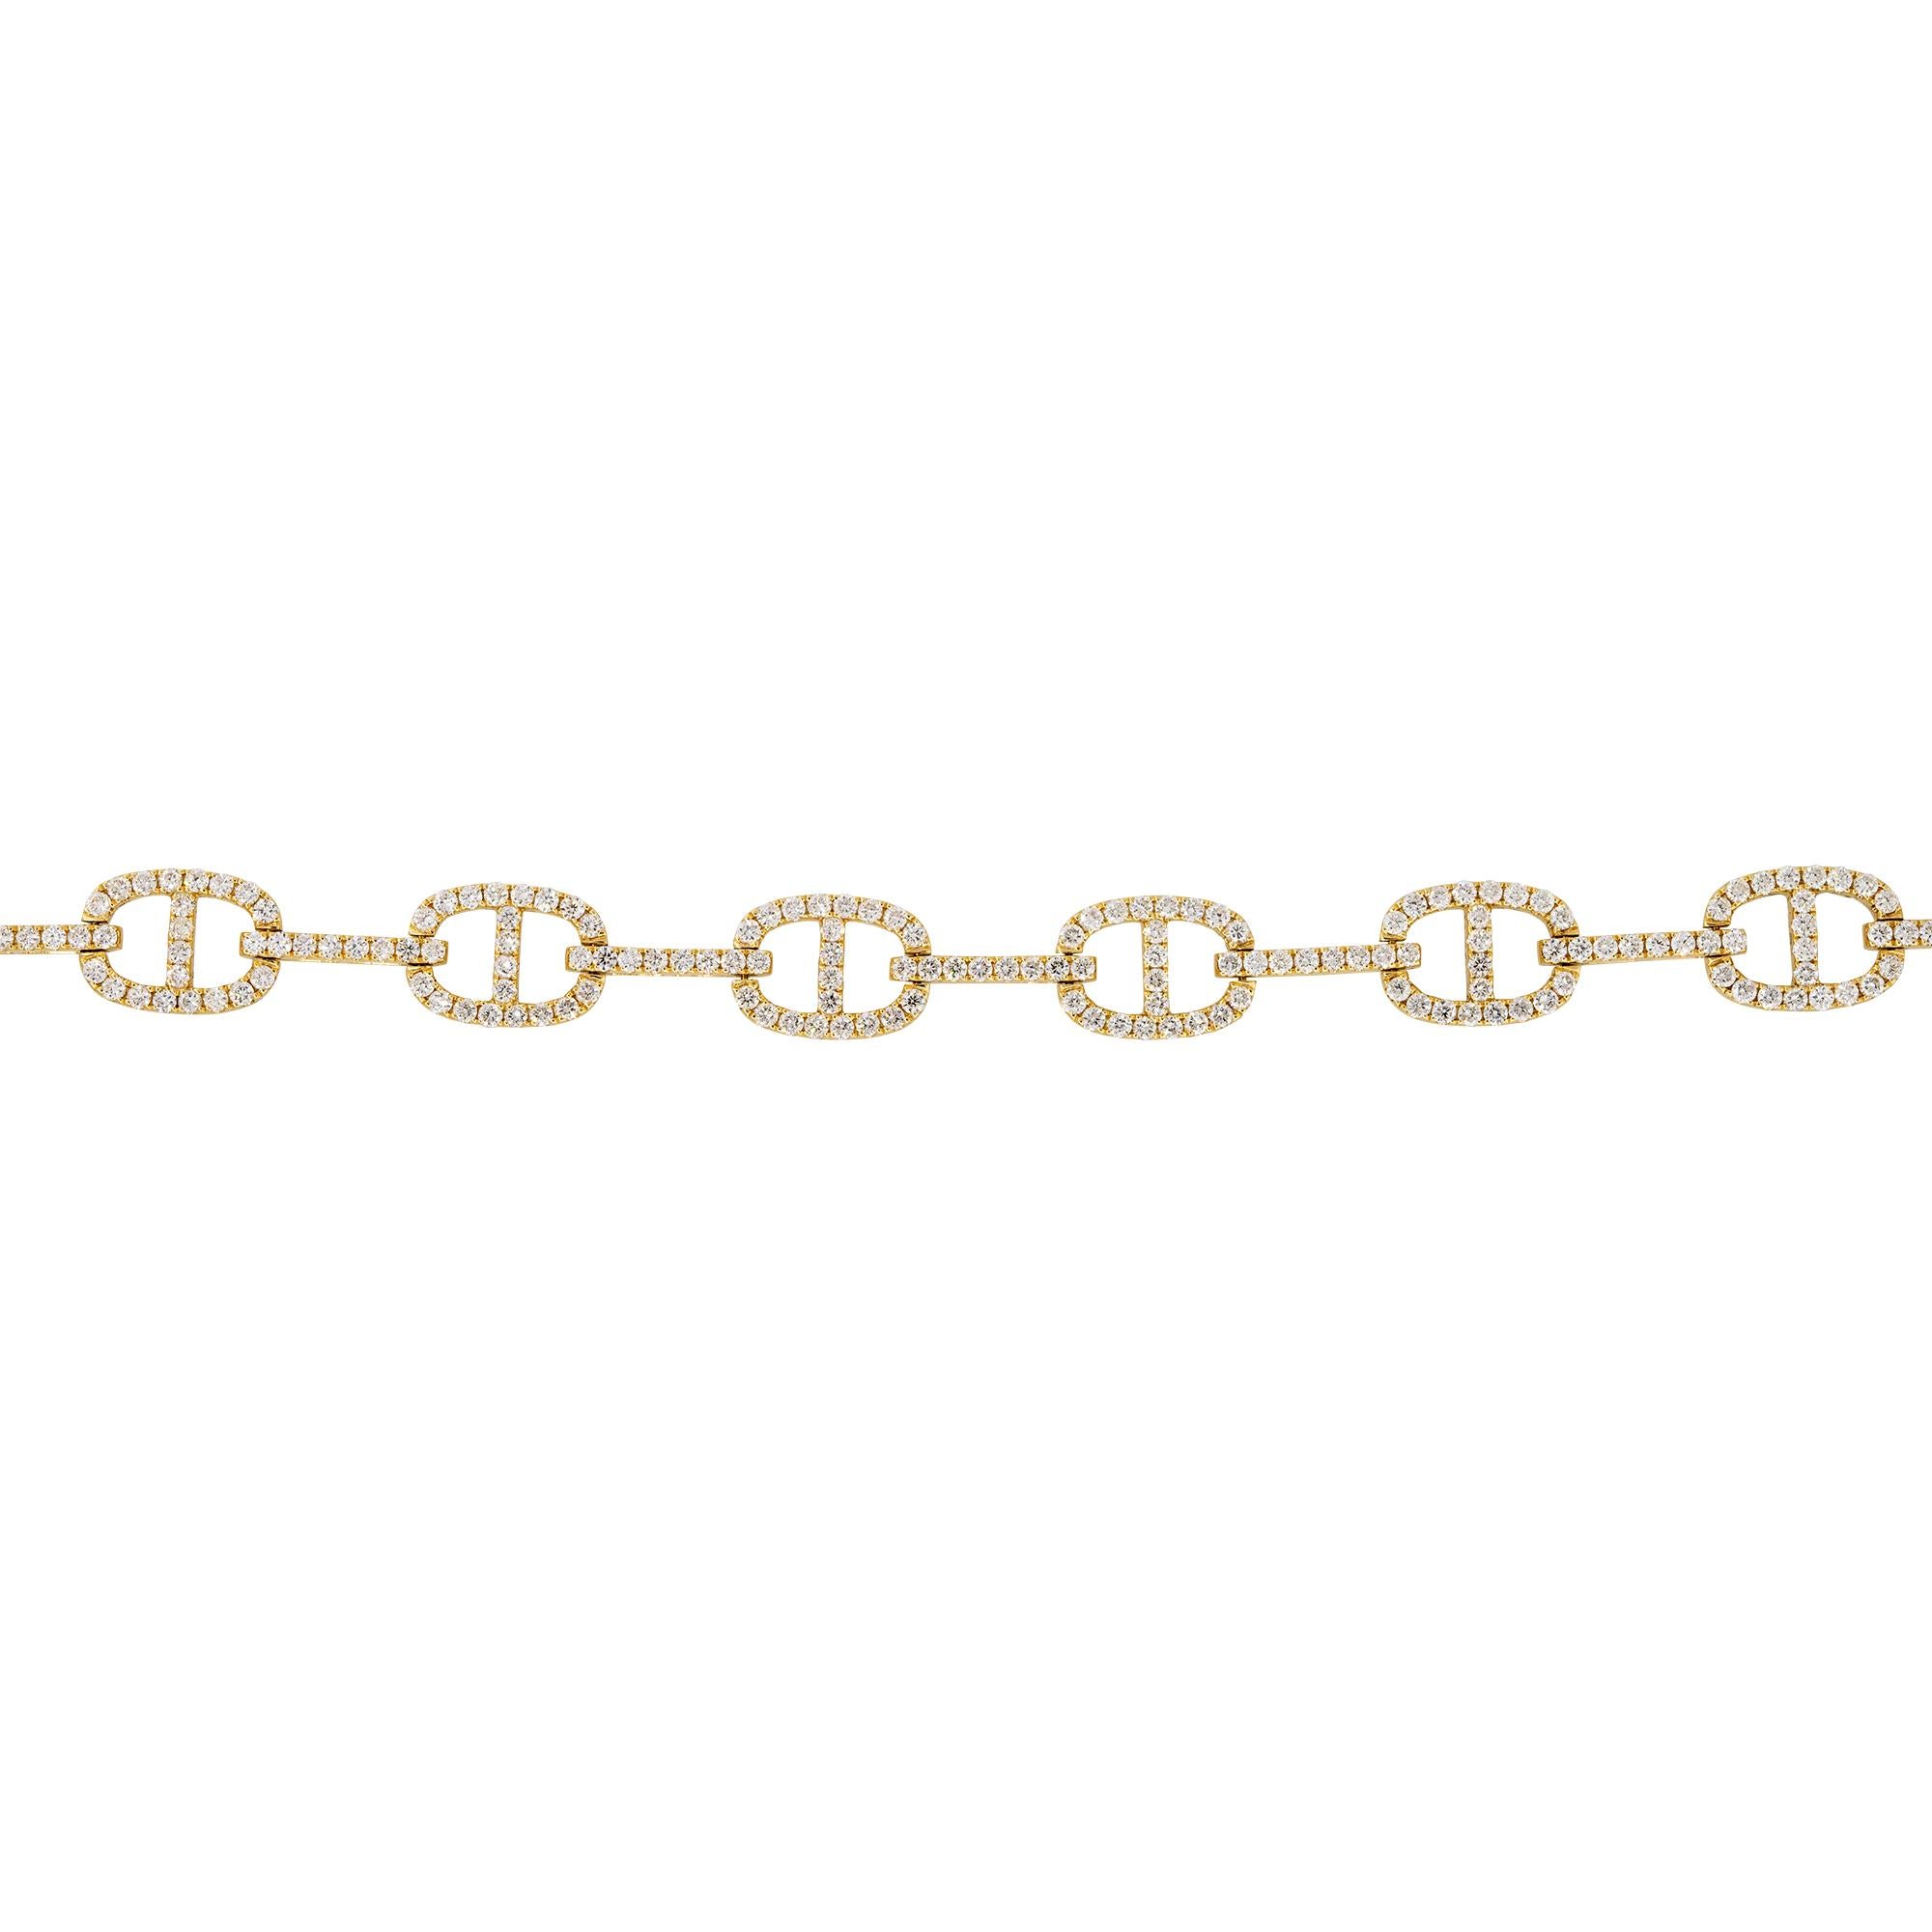 18k Yellow Gold 5.05ctw Round Brilliant Cut Diamond Oval Link Bracelet
Material: 18K Yellow Gold
Diamond Details: There are approximately 5.05 Carats of Round Brilliant Cut Diamonds. There are 197 stones total. All diamonds are approximately G/H in